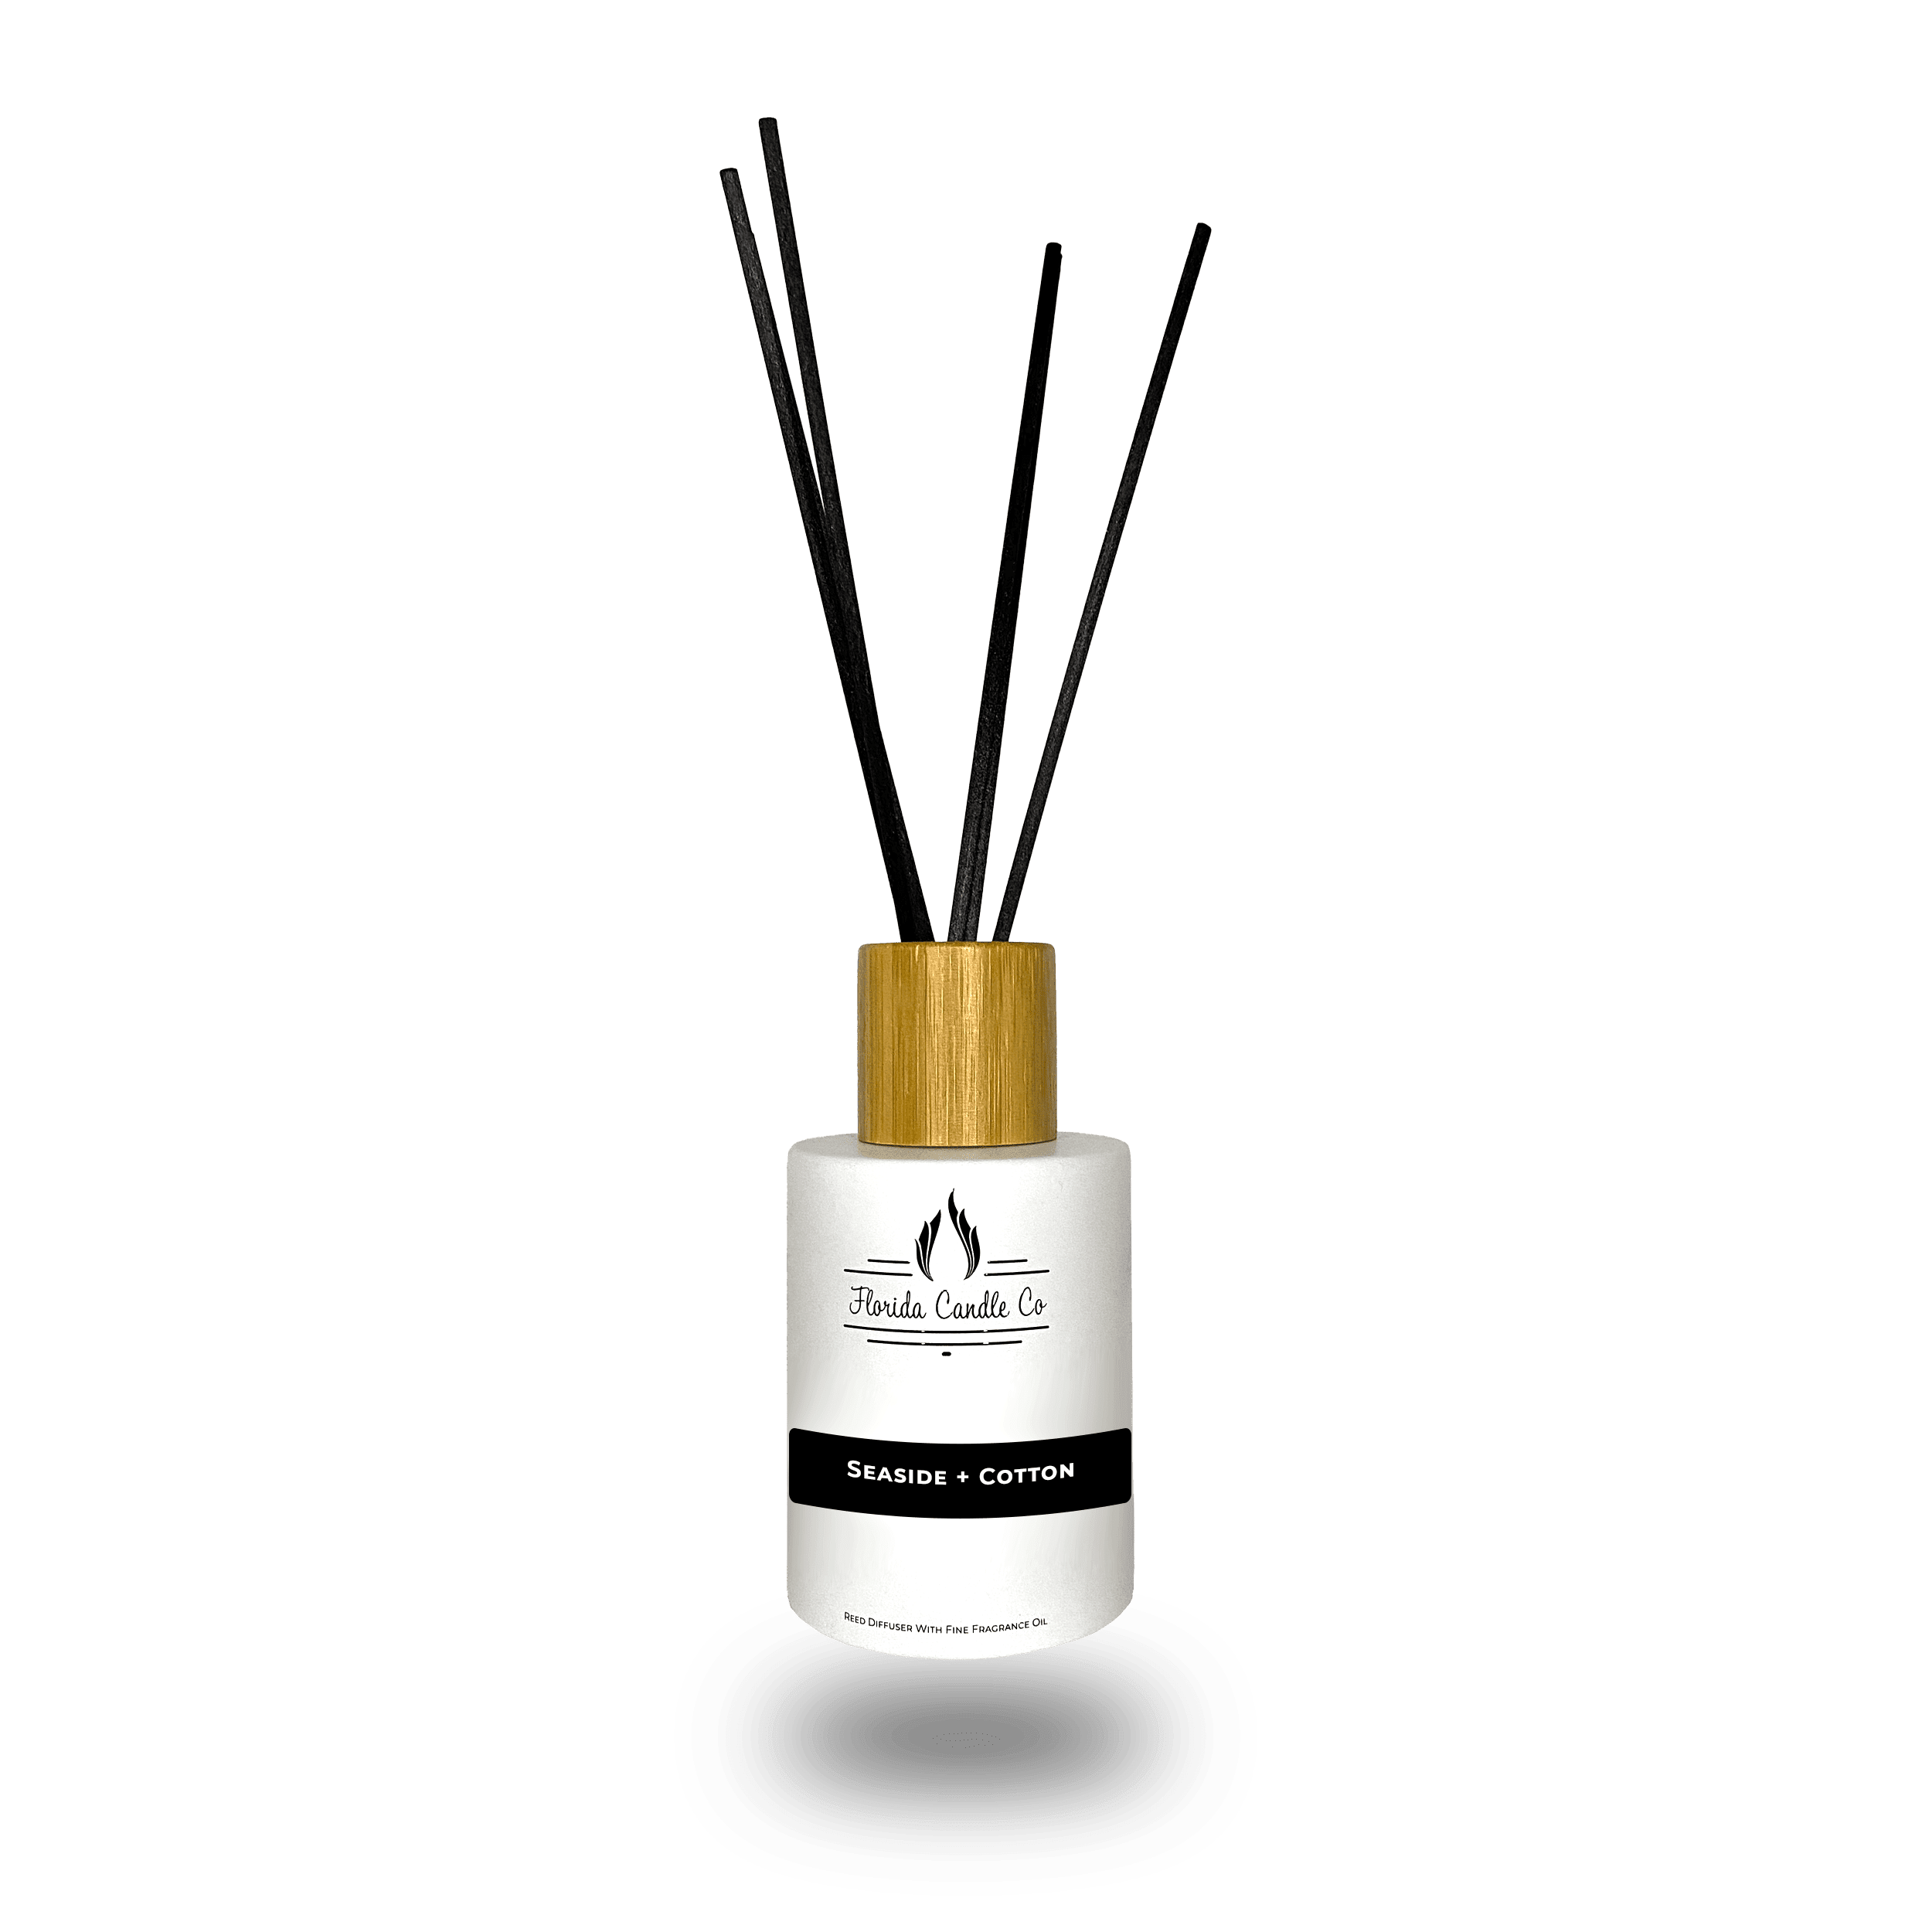 Featured Image for Seaside + Cotton Reed Diffuser